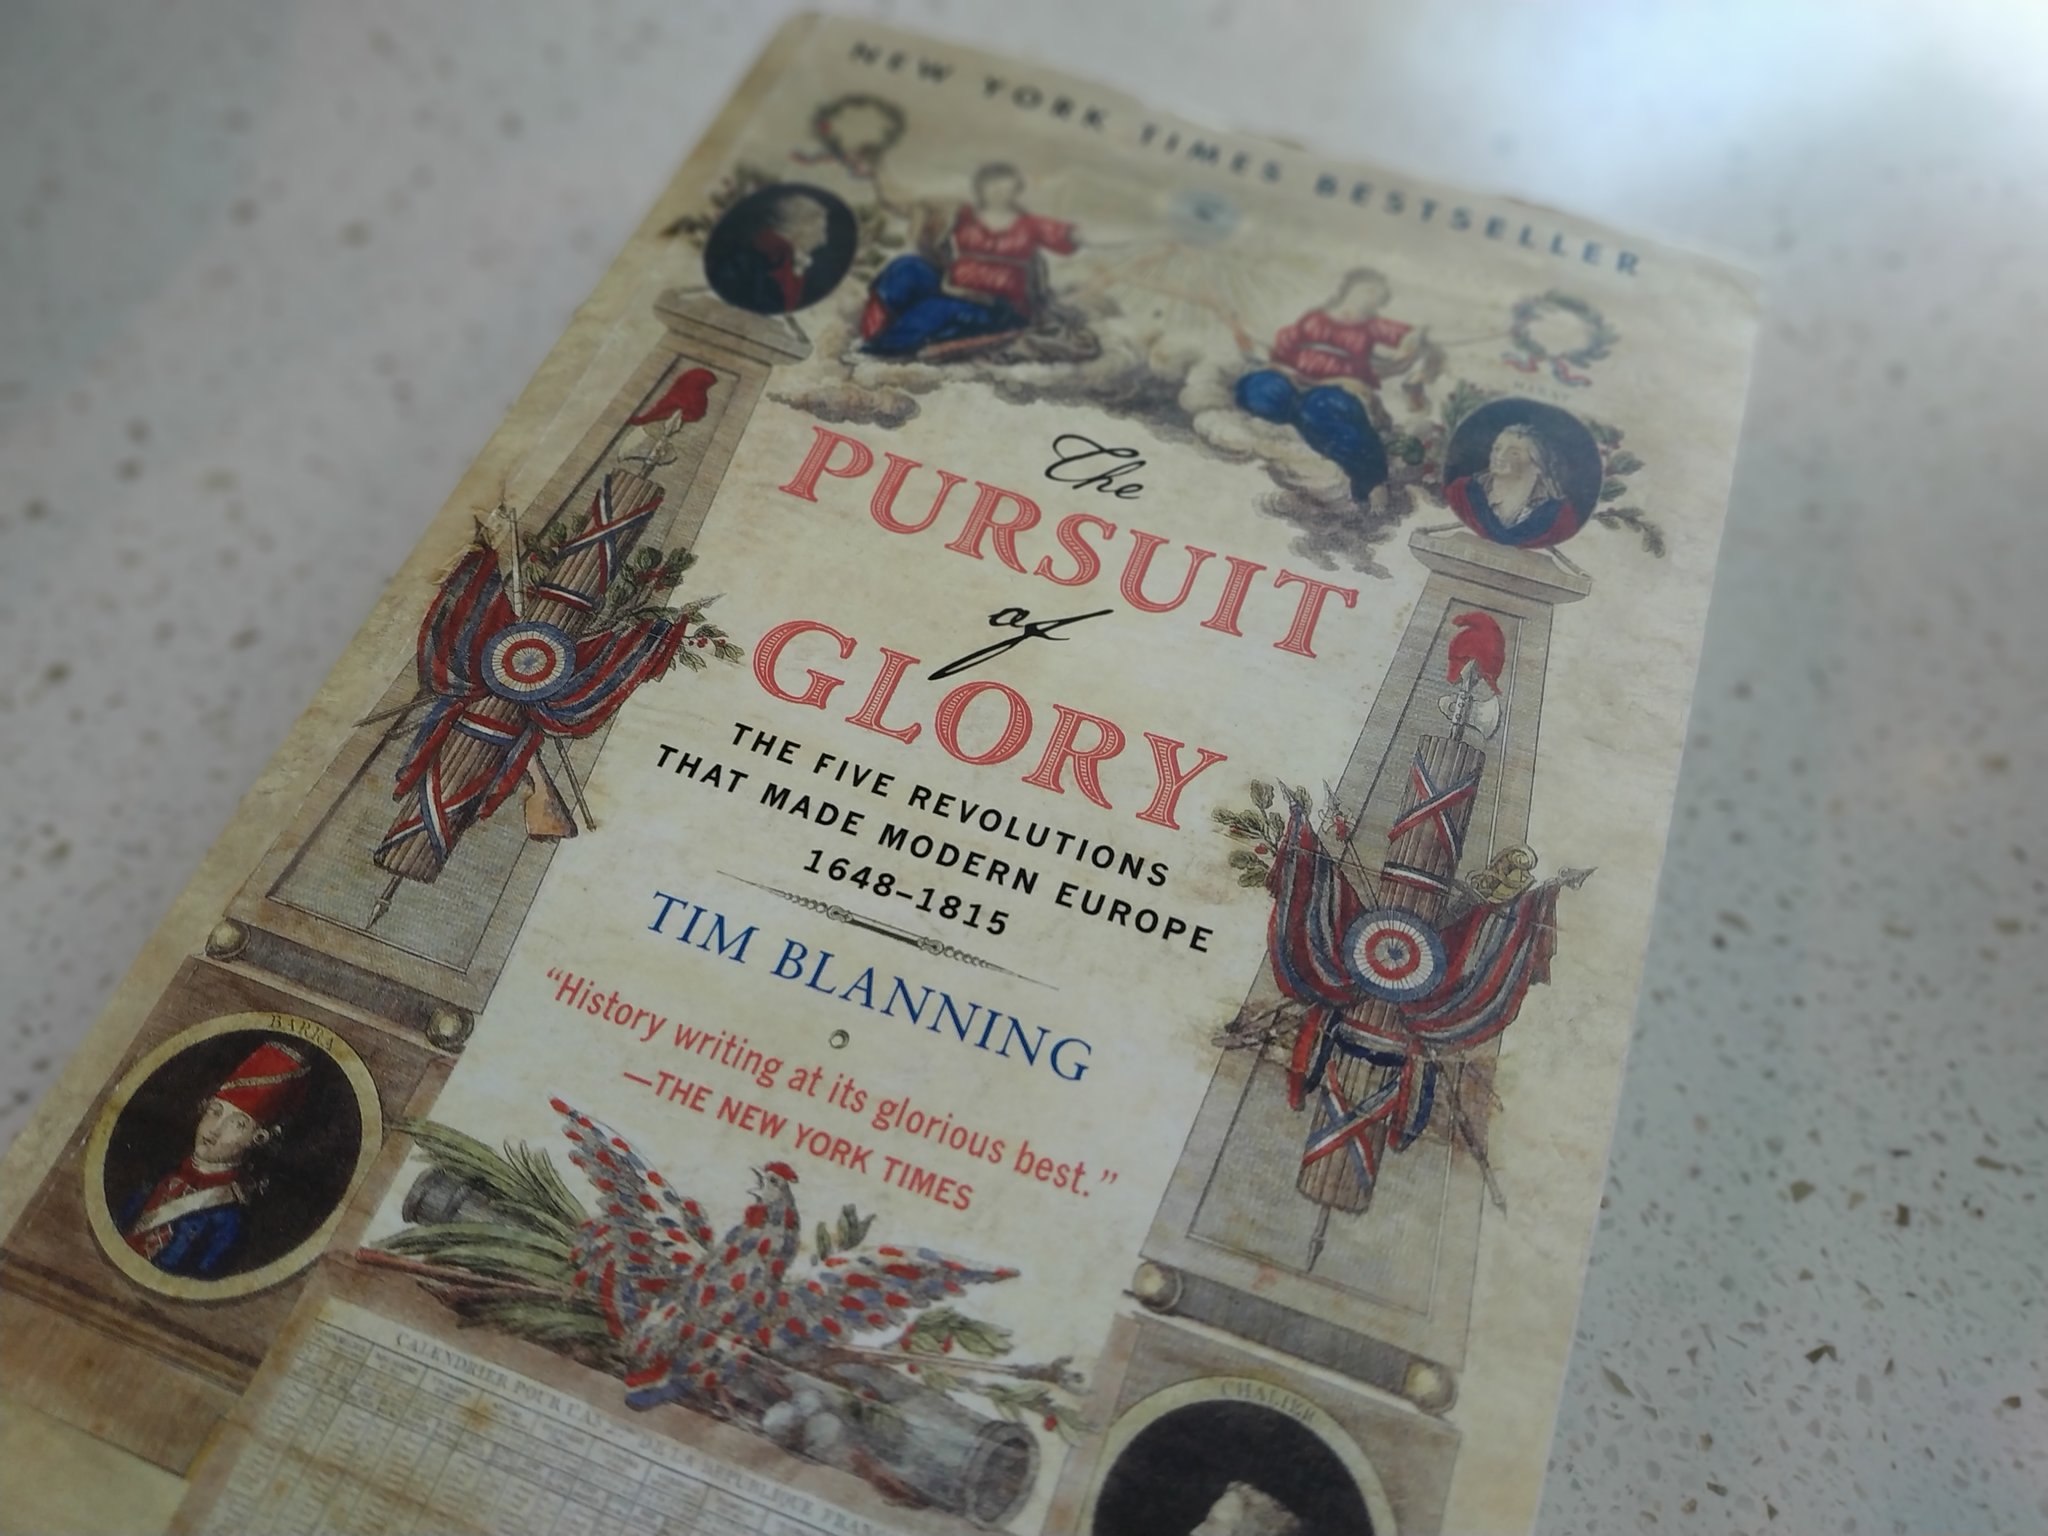 adrian on Twitter: "@_FullyBooked The Pursuit of Glory, by Tim Blanning Usually takes me a month to finish this thick of a book. Though I'm this at a much faster pace